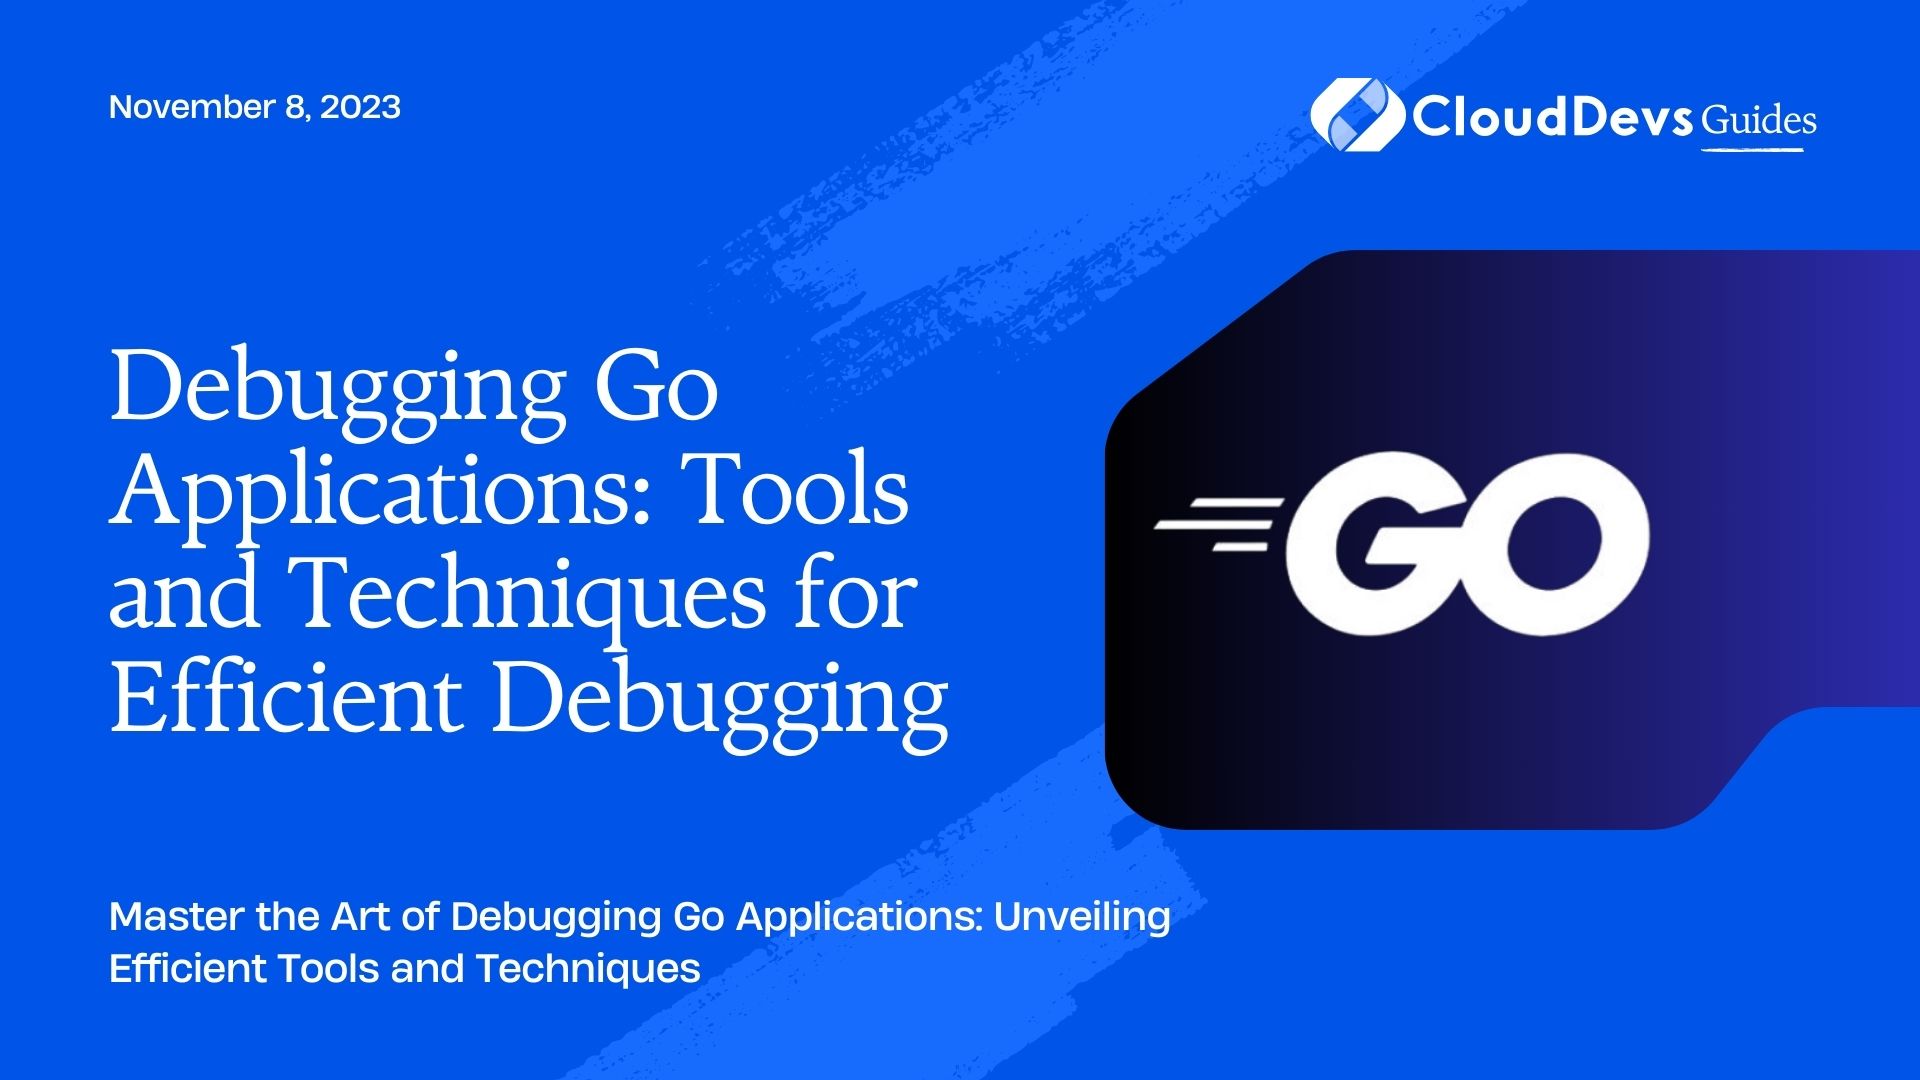 Debugging Go Applications: Tools and Techniques for Efficient Debugging